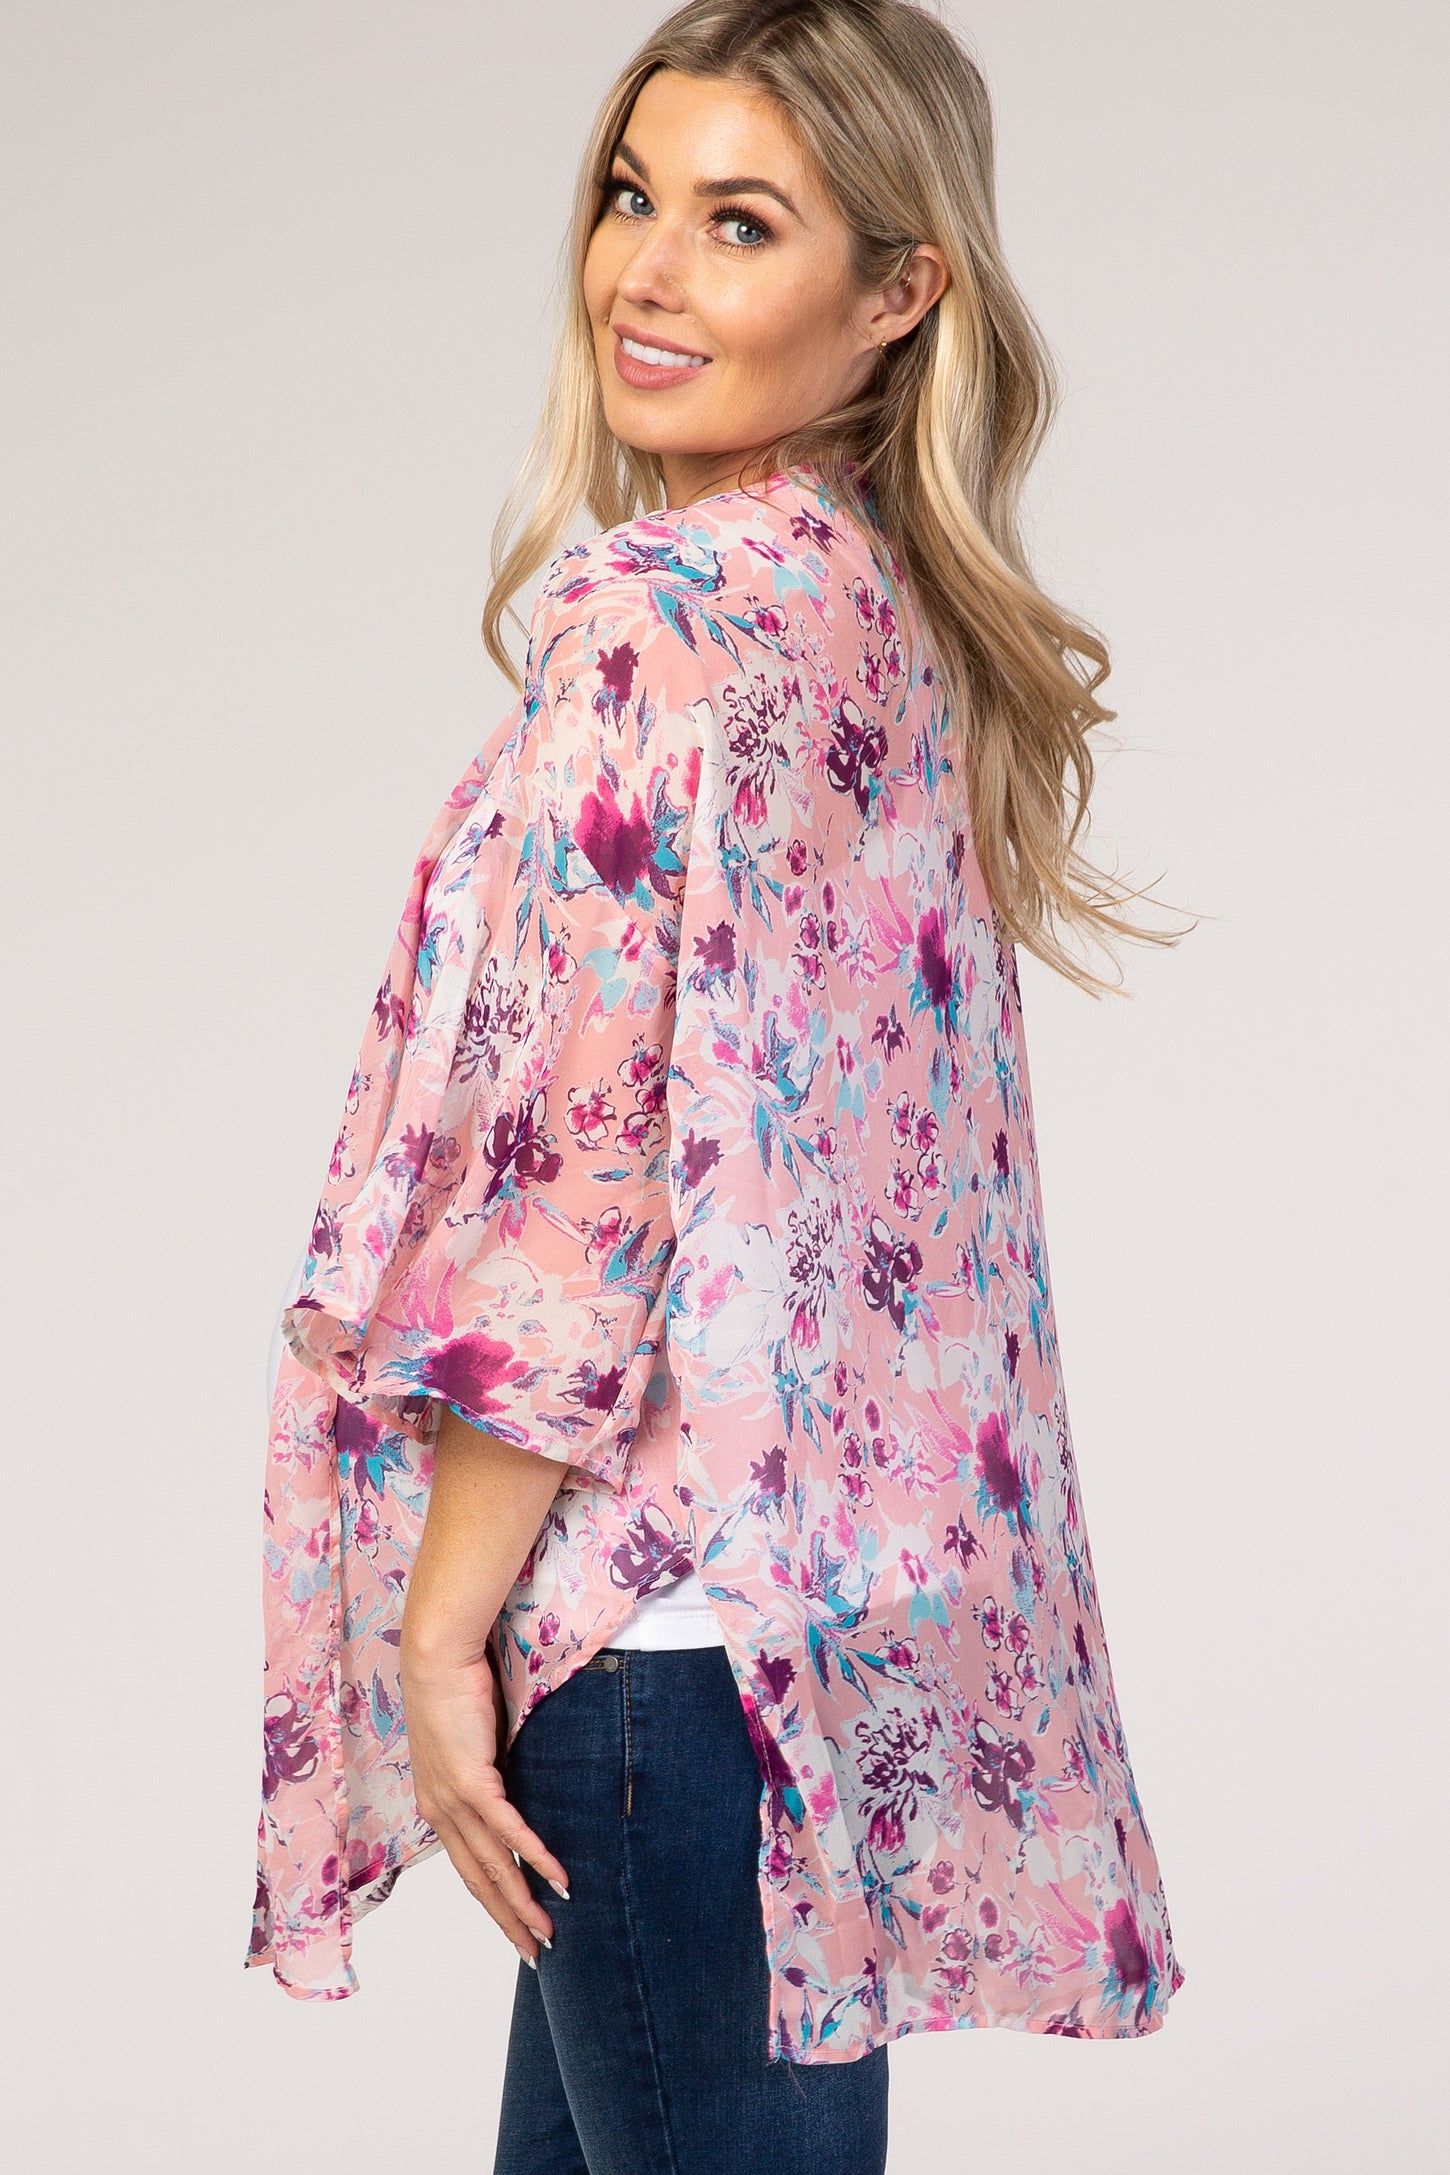 Light Pink Floral Chiffon Maternity Cover Up